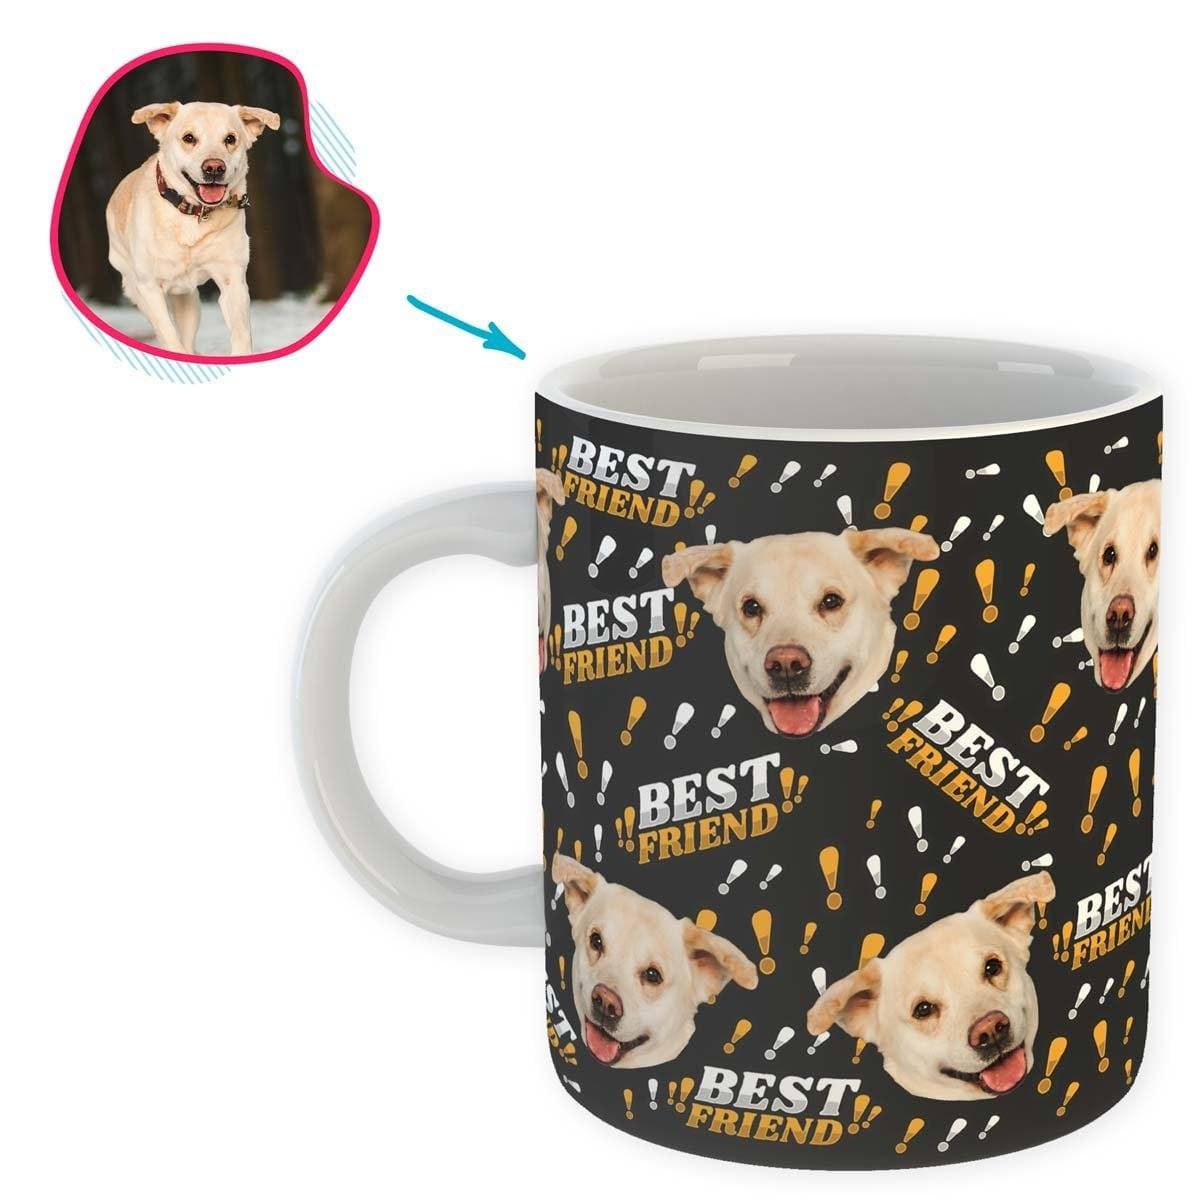 dark Best Friend mug personalized with photo of face printed on it